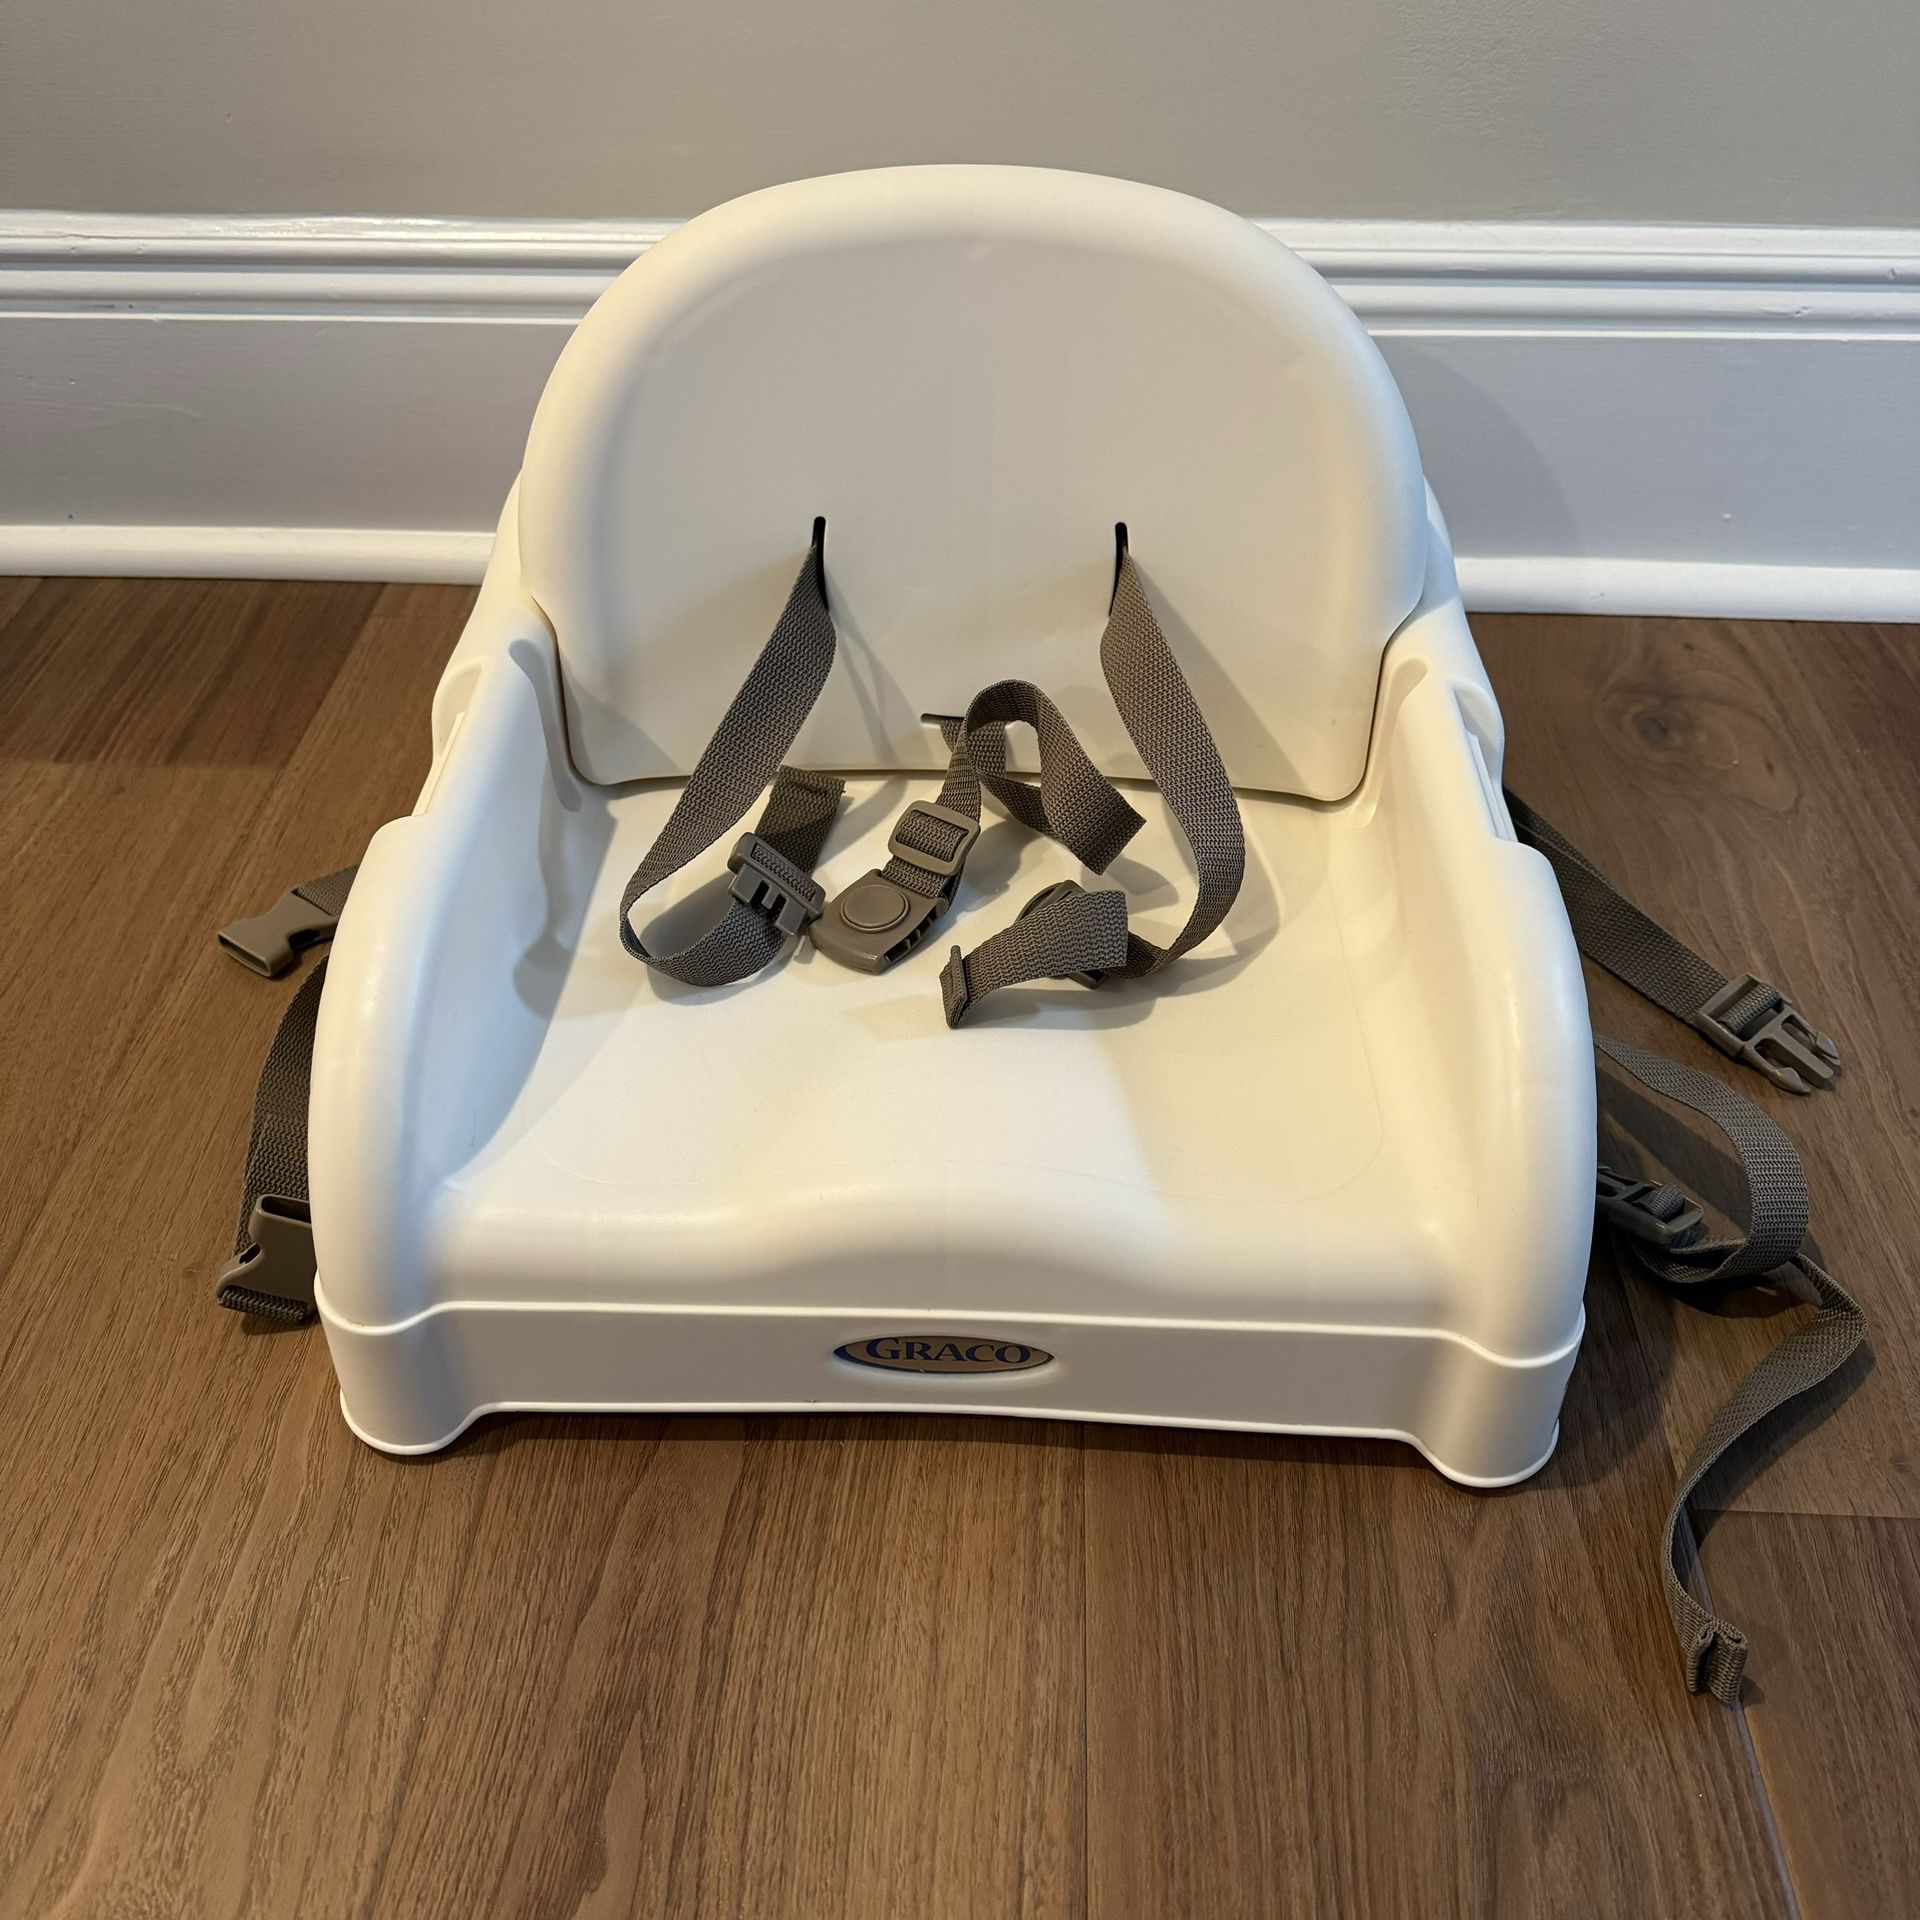 Graco Toddler booster seat for table